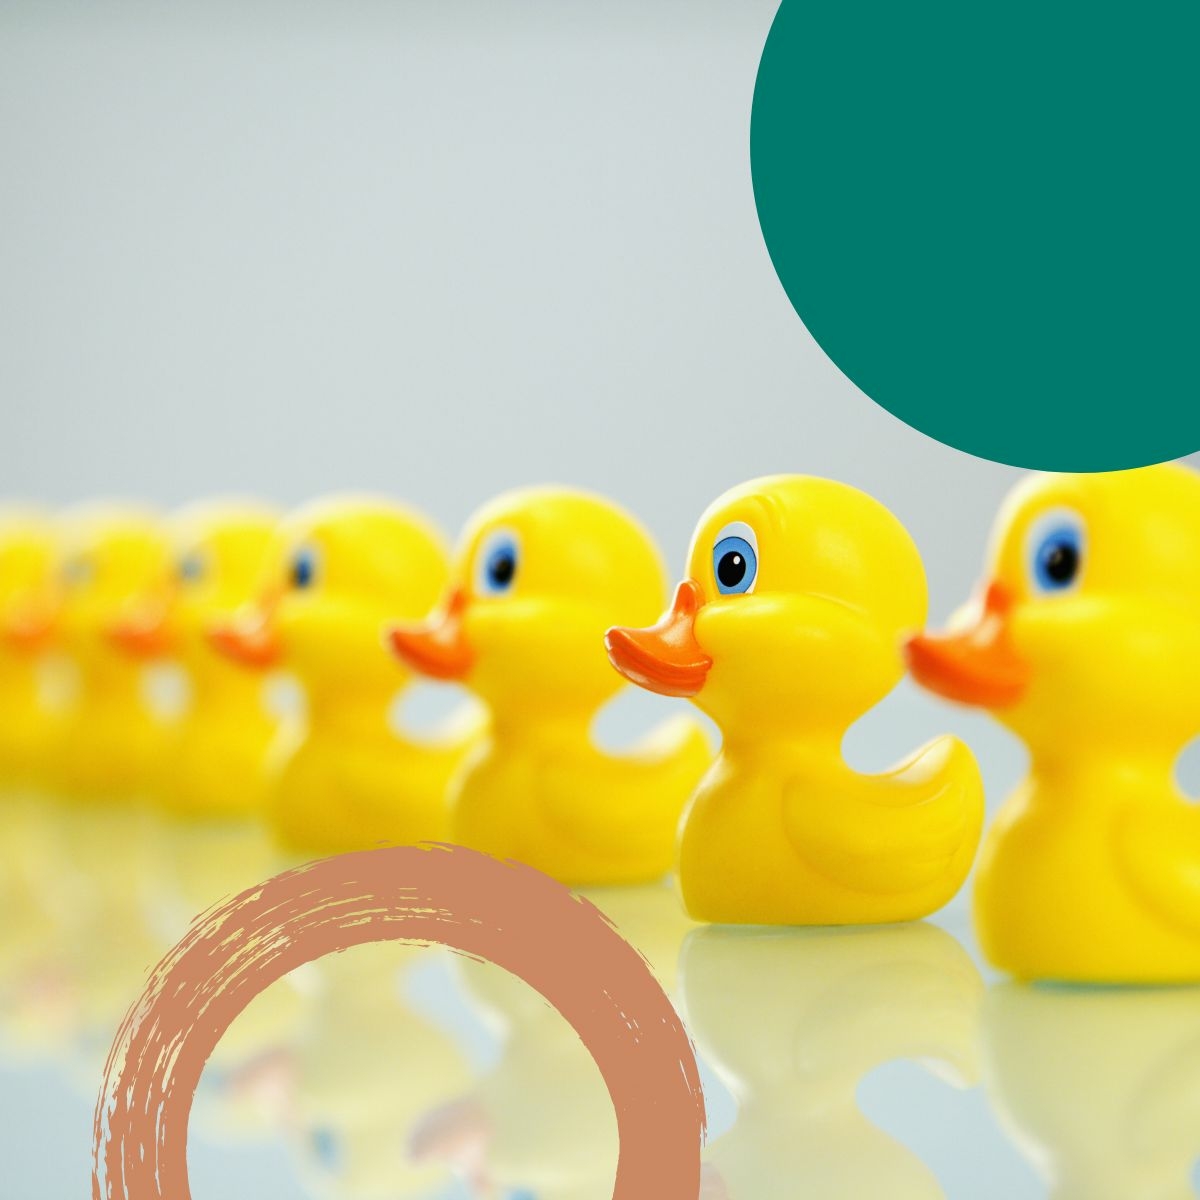 Get your ducks in a row!